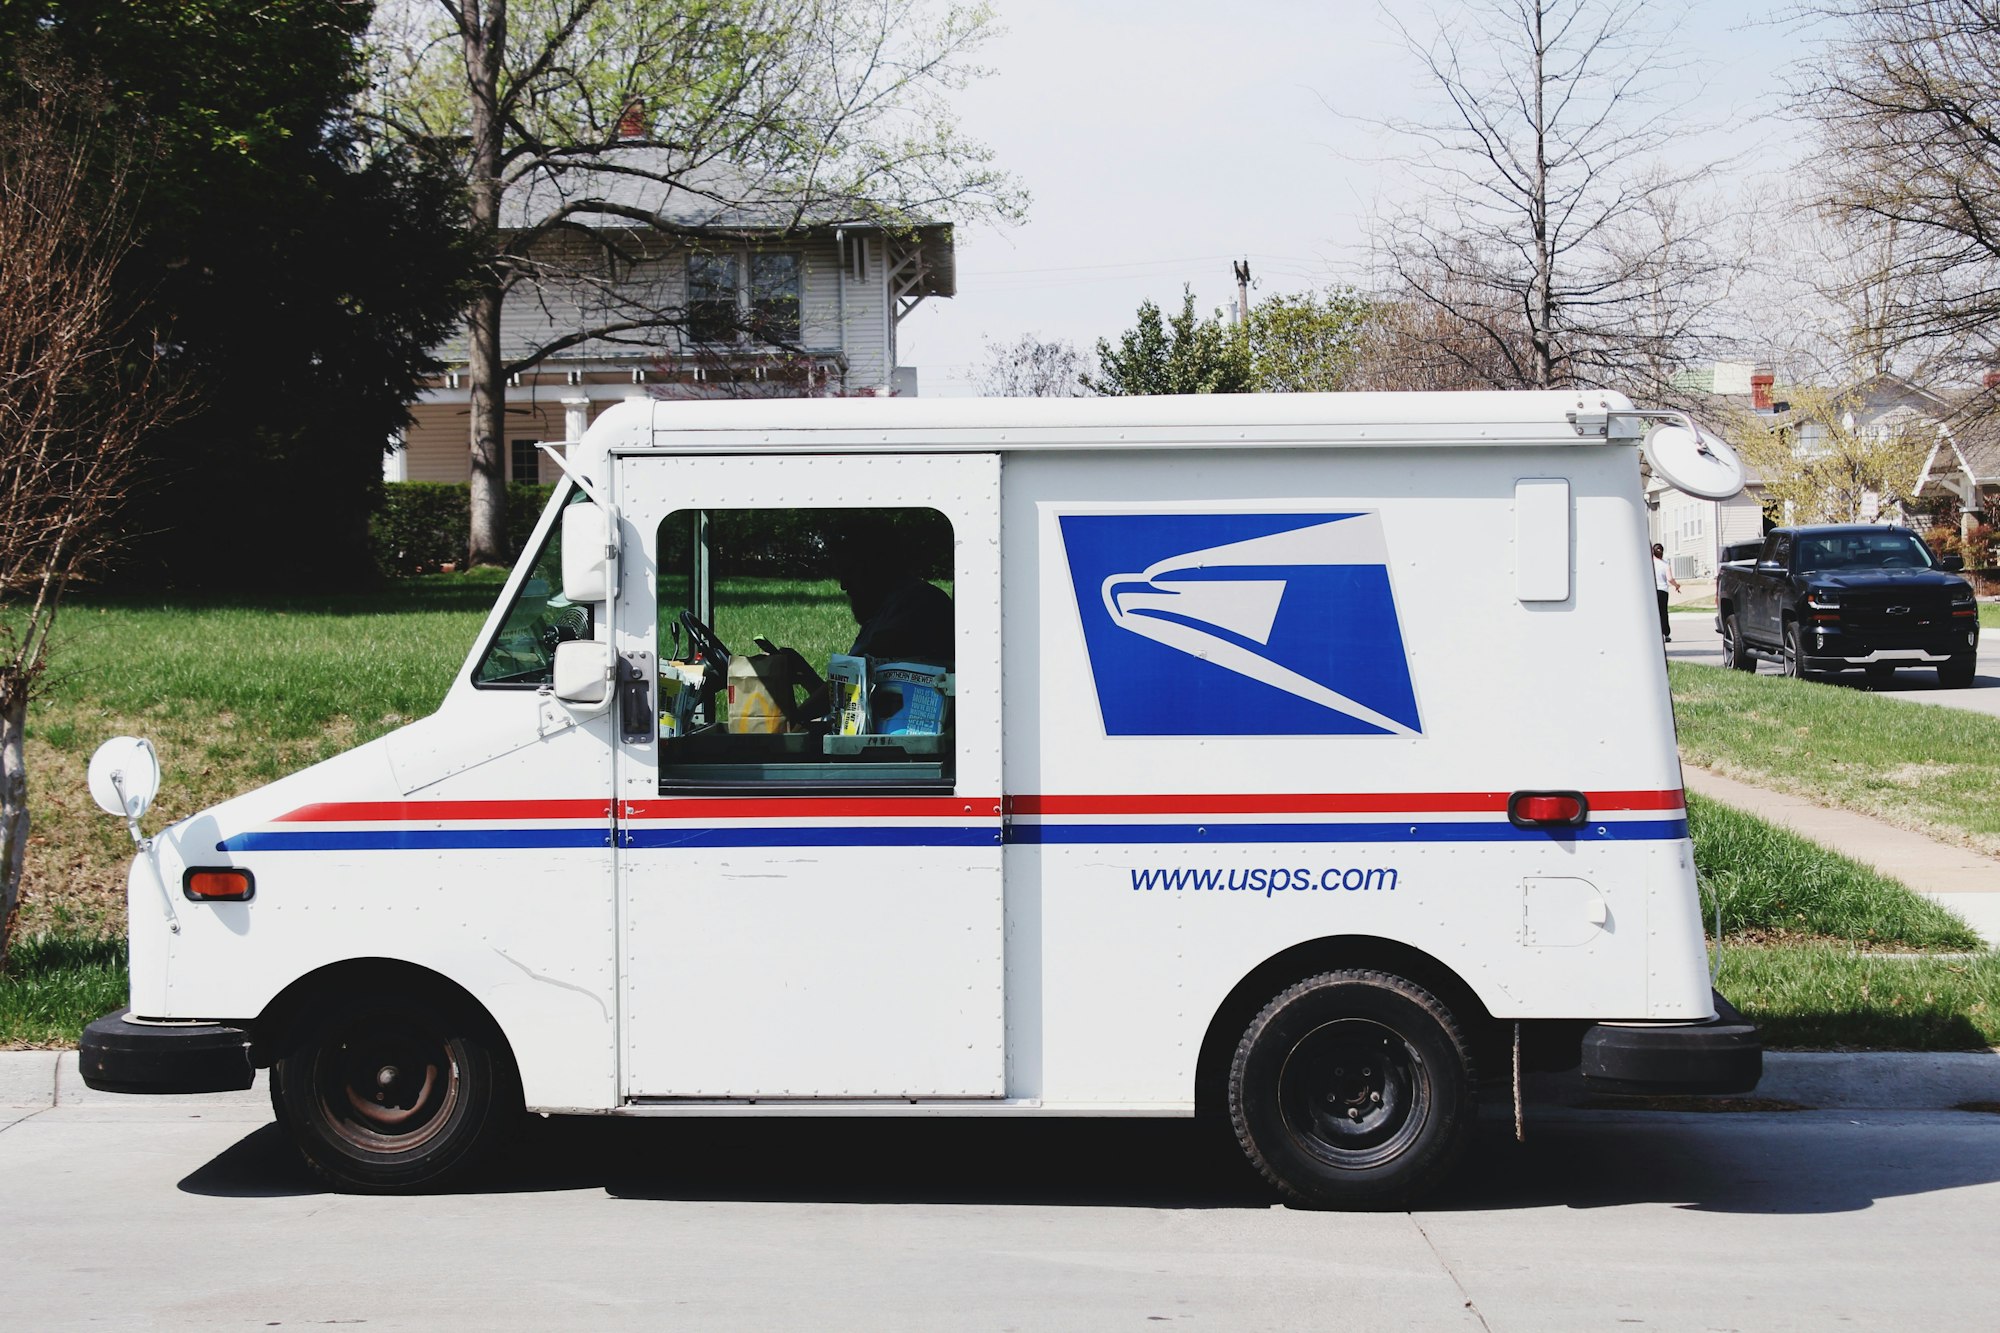 Mailman Shocked After Being Chased By This